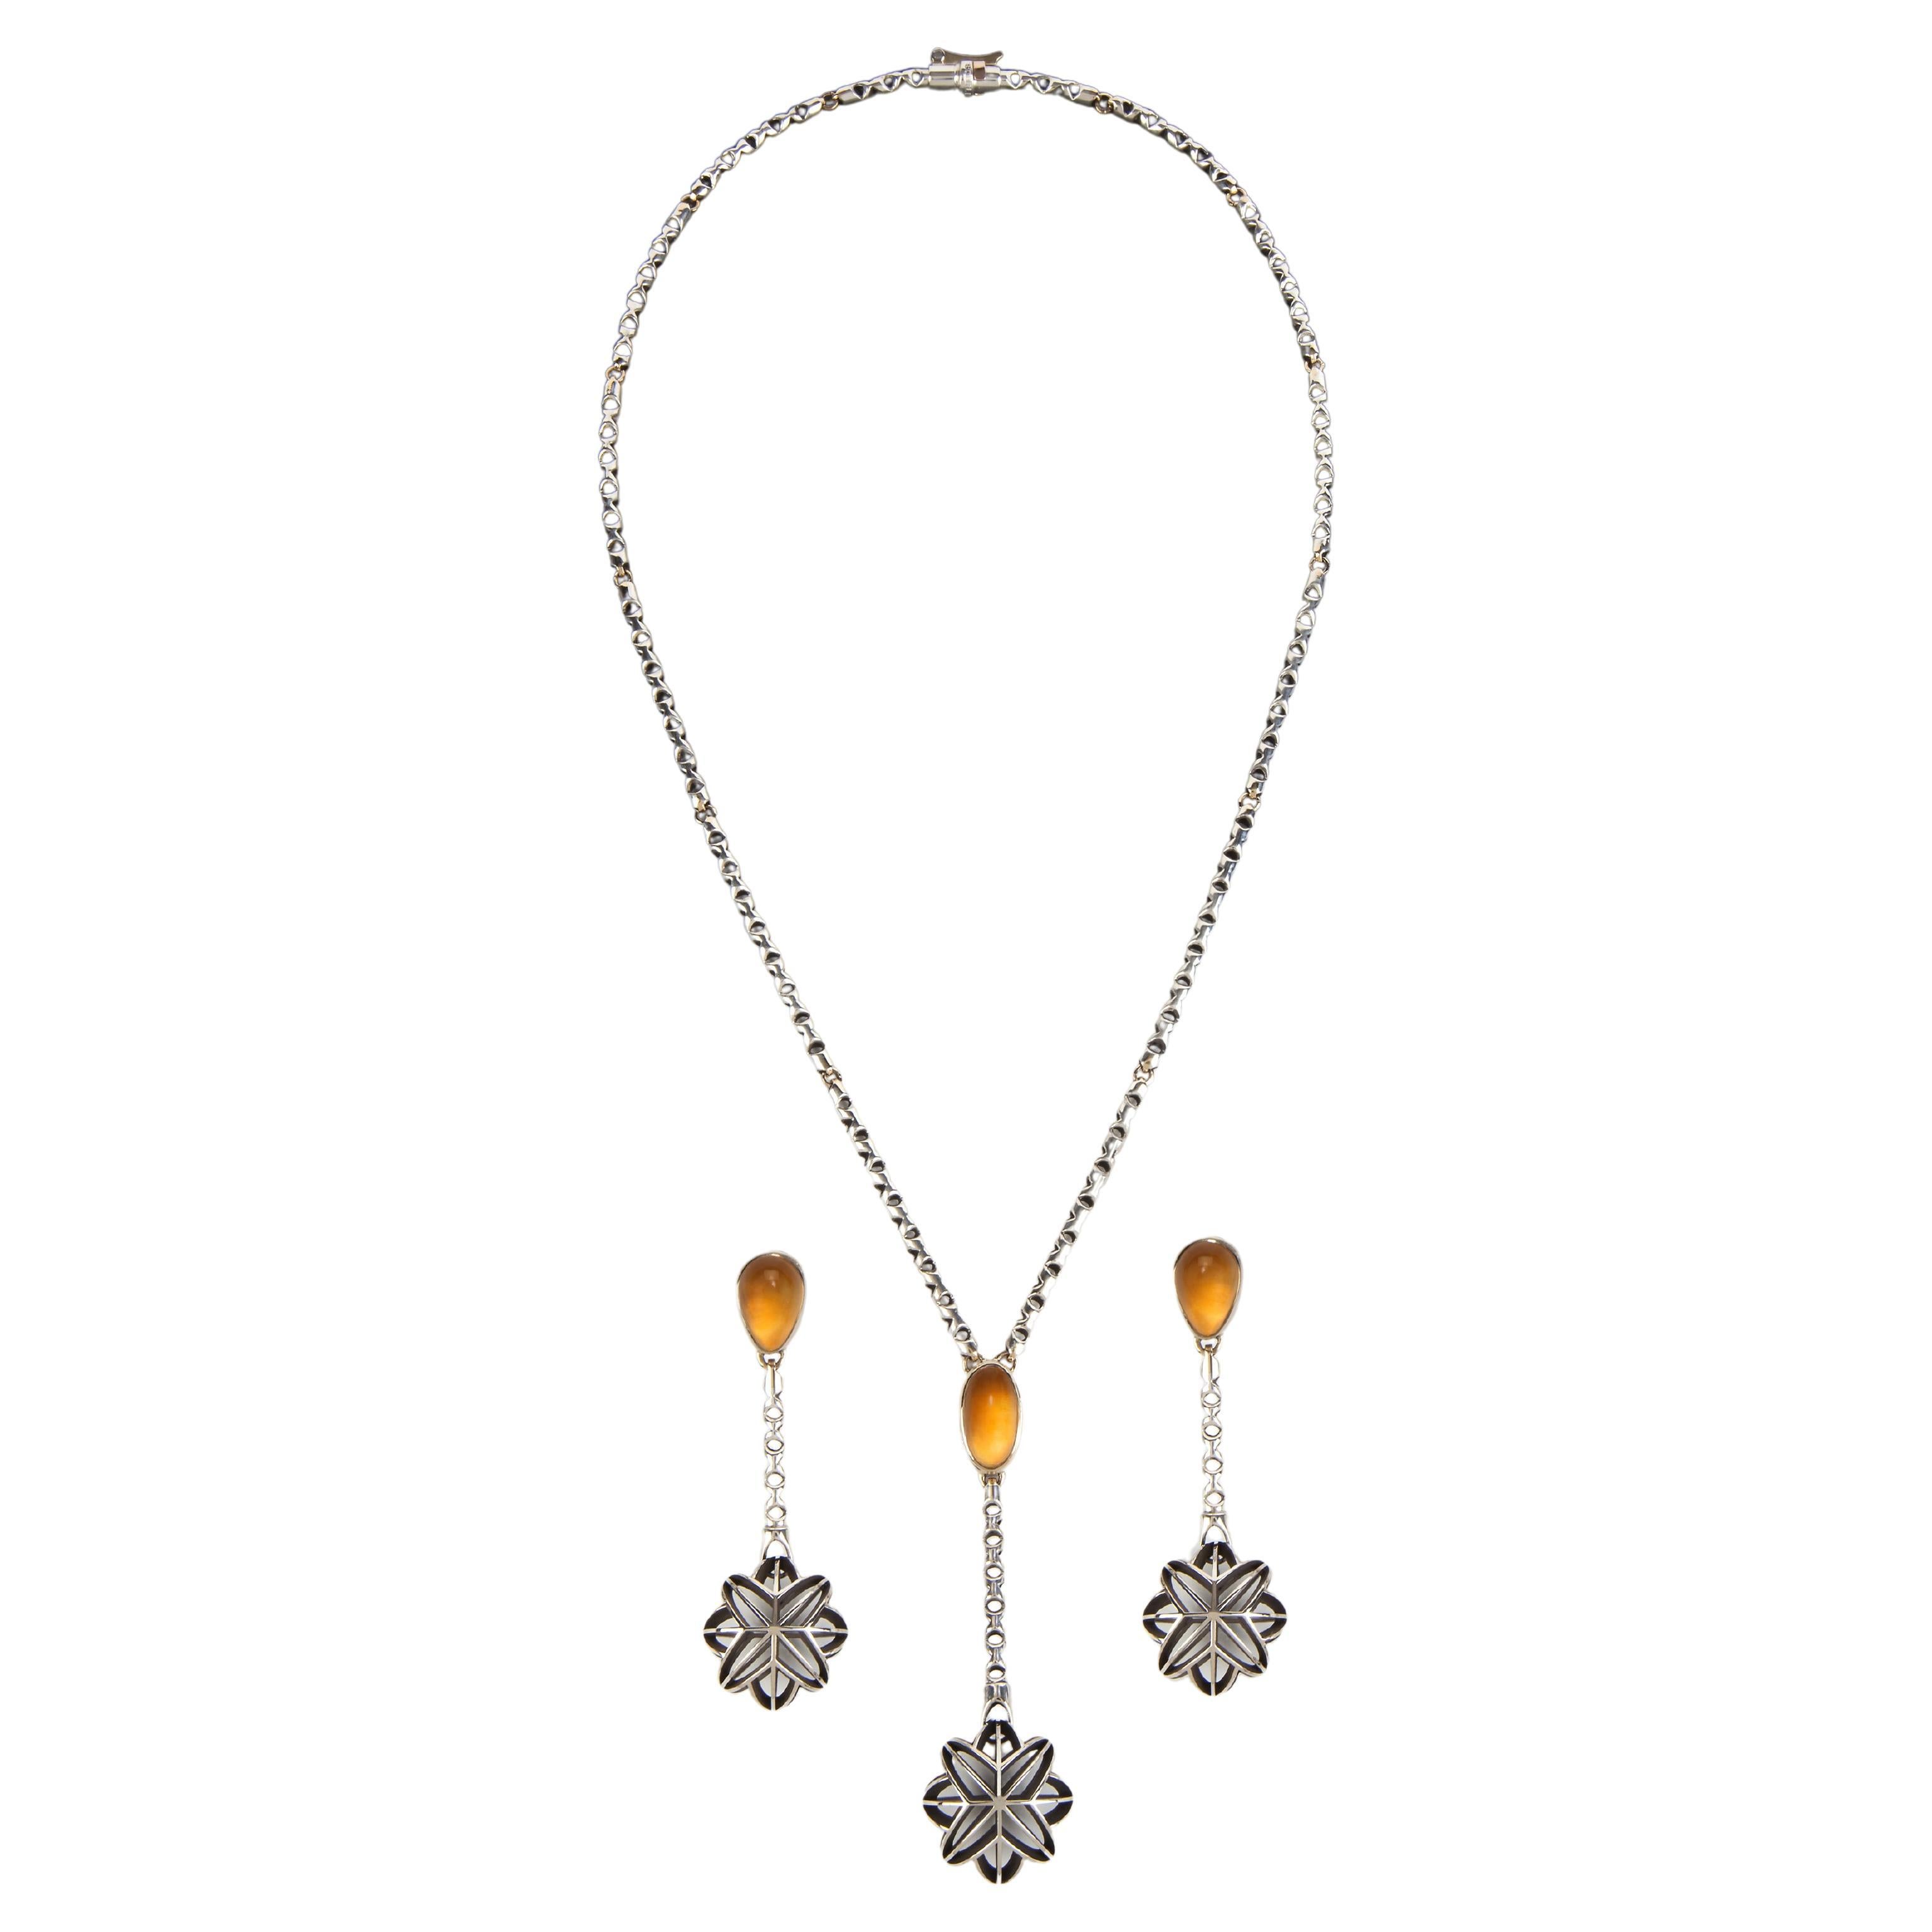 Valerie Jo Coulson, Sterling Silver, 14k Gold, Citrine, Necklace and Earrings For Sale